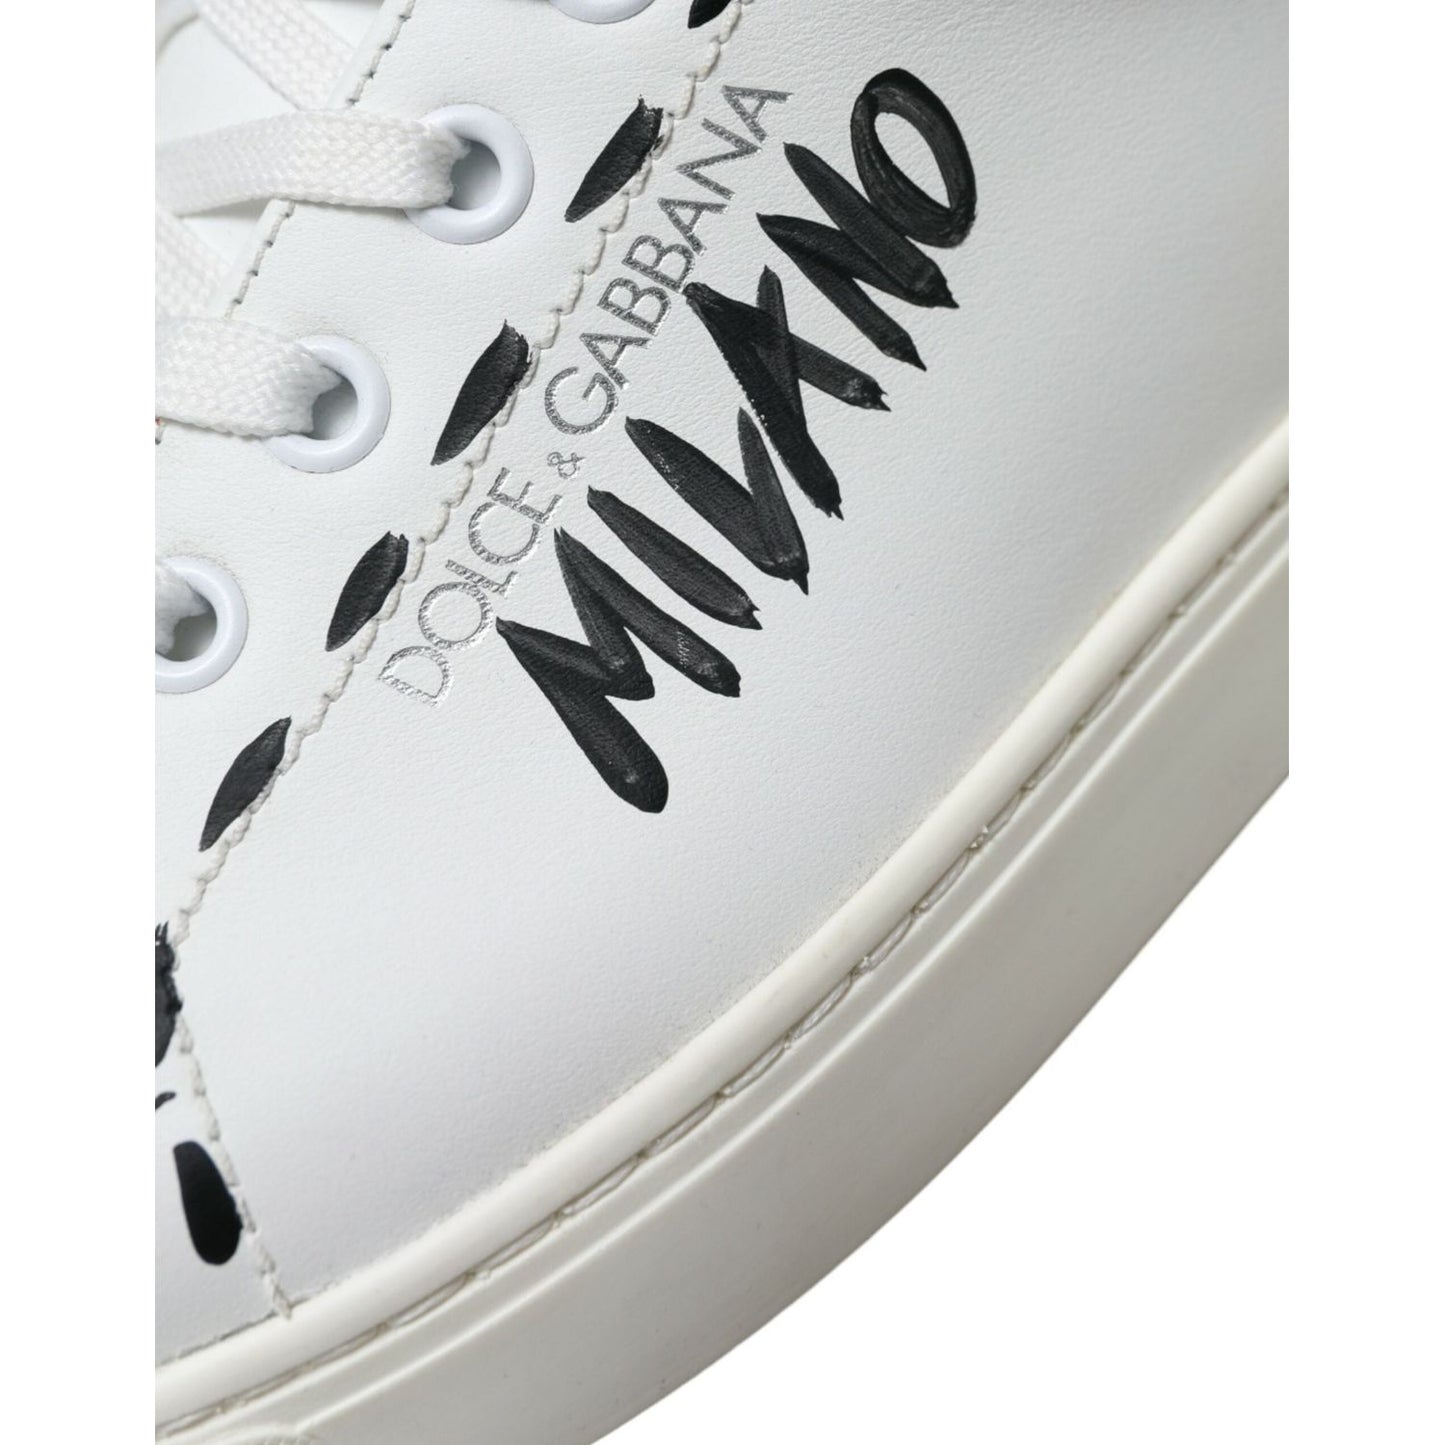 Dolce & Gabbana Sleek White Low Top Leather Sneakers white-leather-love-milano-men-sneakers-shoes